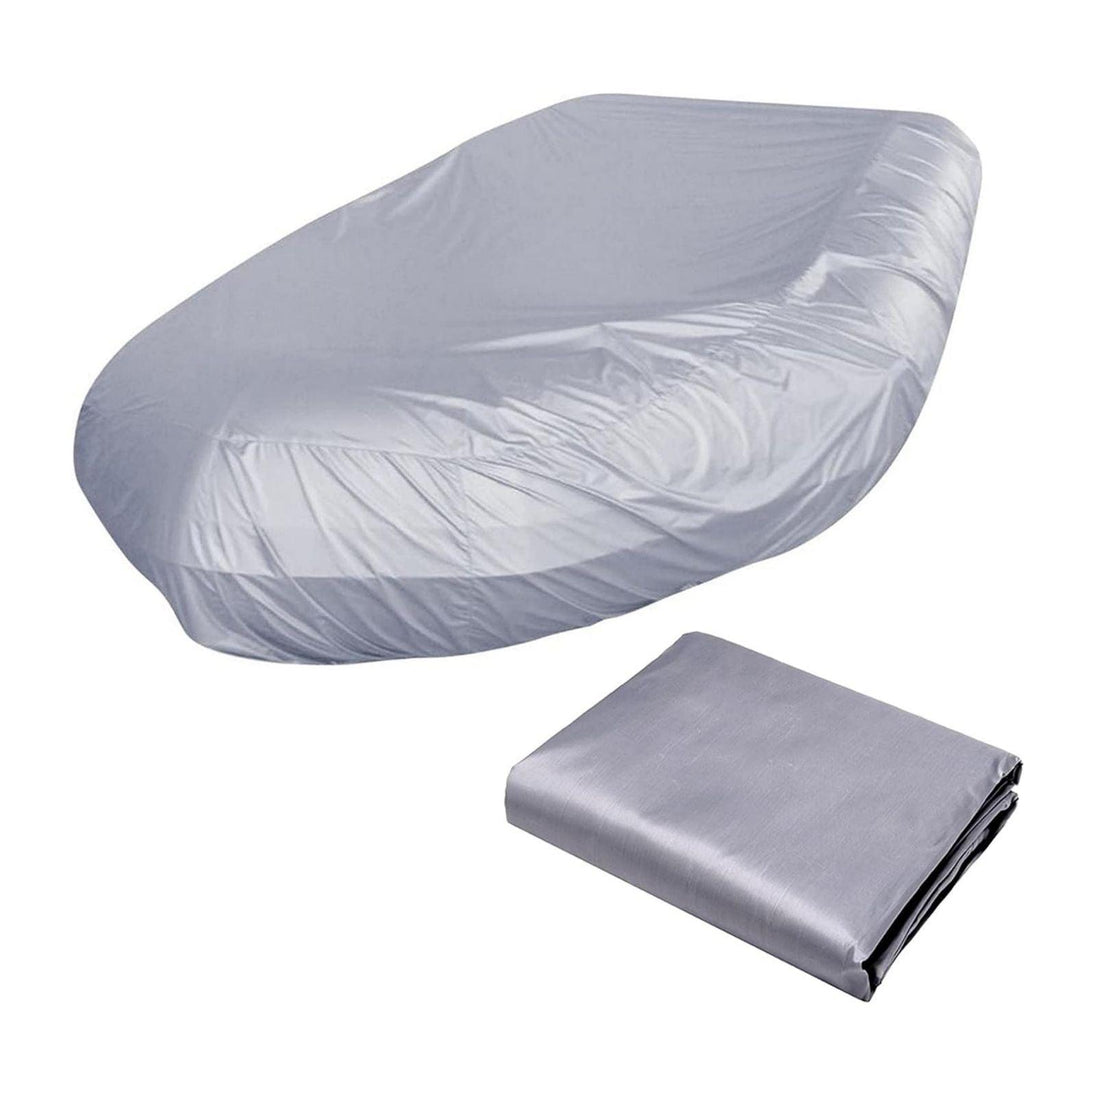 Buy 210D Inflatable Boat Cover UV Resistant Inflatable Dinghy Boat Cover Waterproof UV Sun Dust Protective Case Kayak Oxford Cloth Cover ( 270 cm ) discounted | Products On Sale Australia